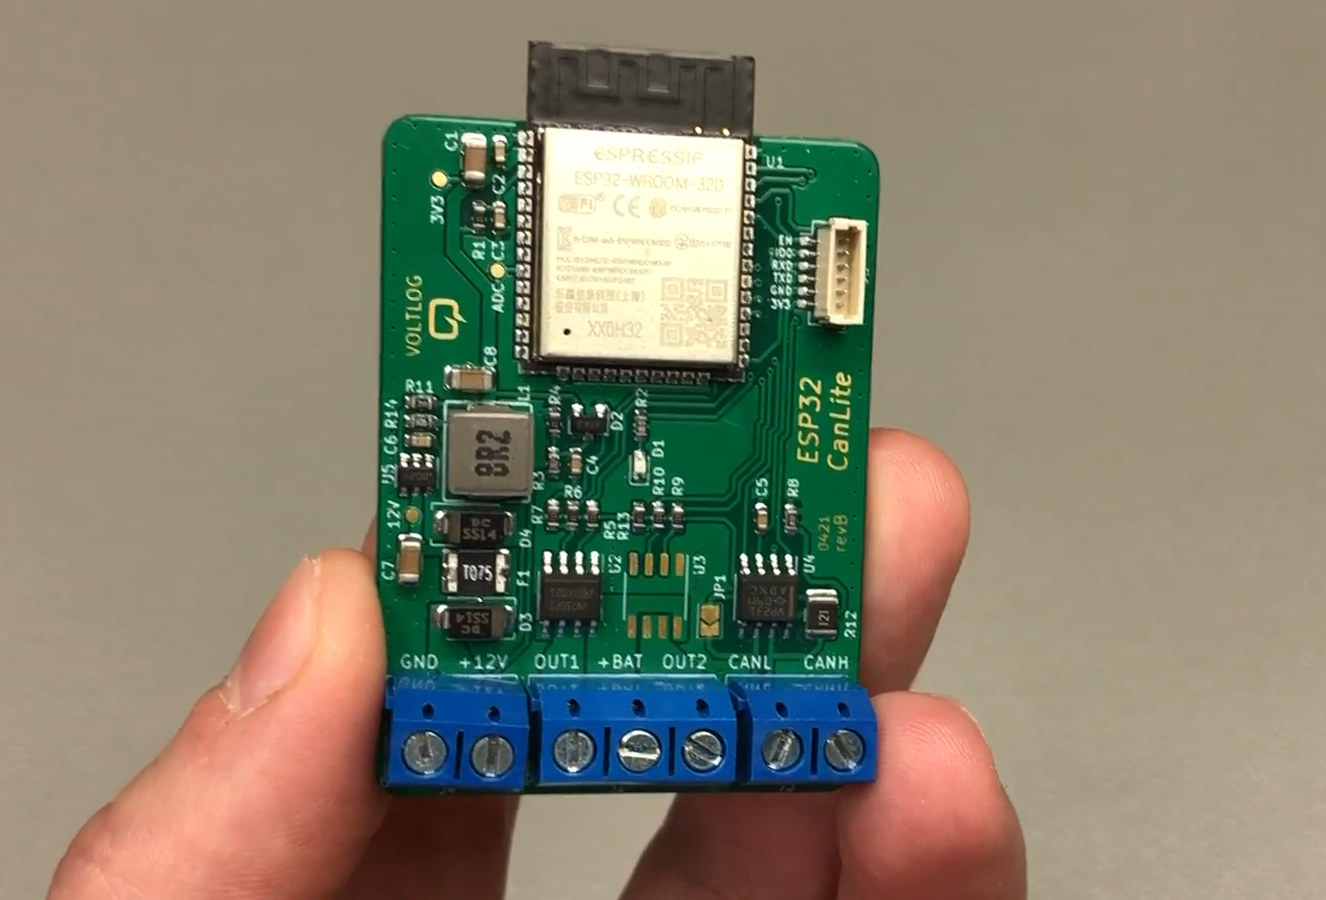 CanLite ESP32 board for CAN Bus hacking support up to two high